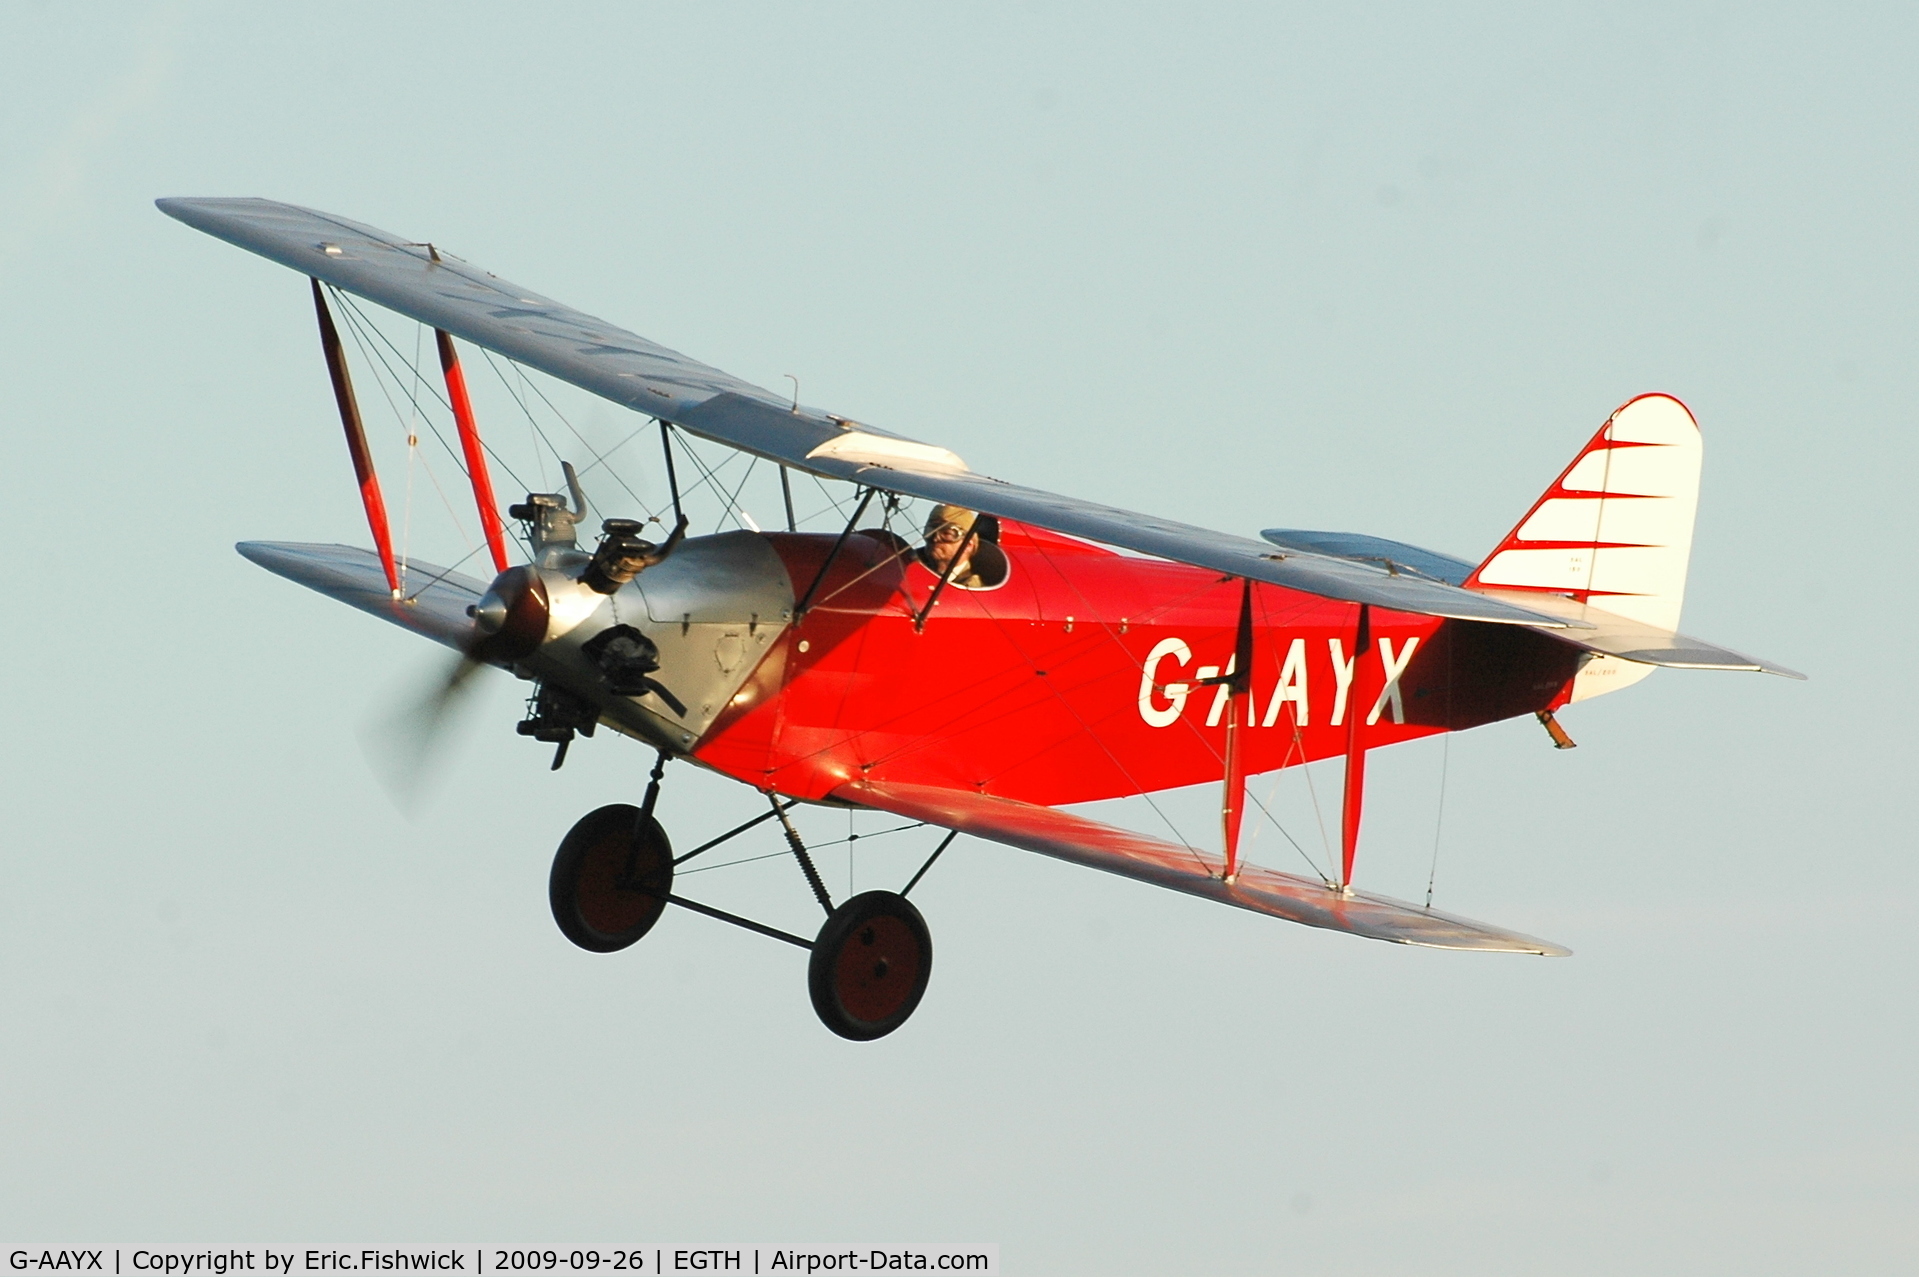 G-AAYX, 1930 Southern Martlet C/N 202, 43. G-AAYX at Shuttleworth Evening Air Display Sep. 09